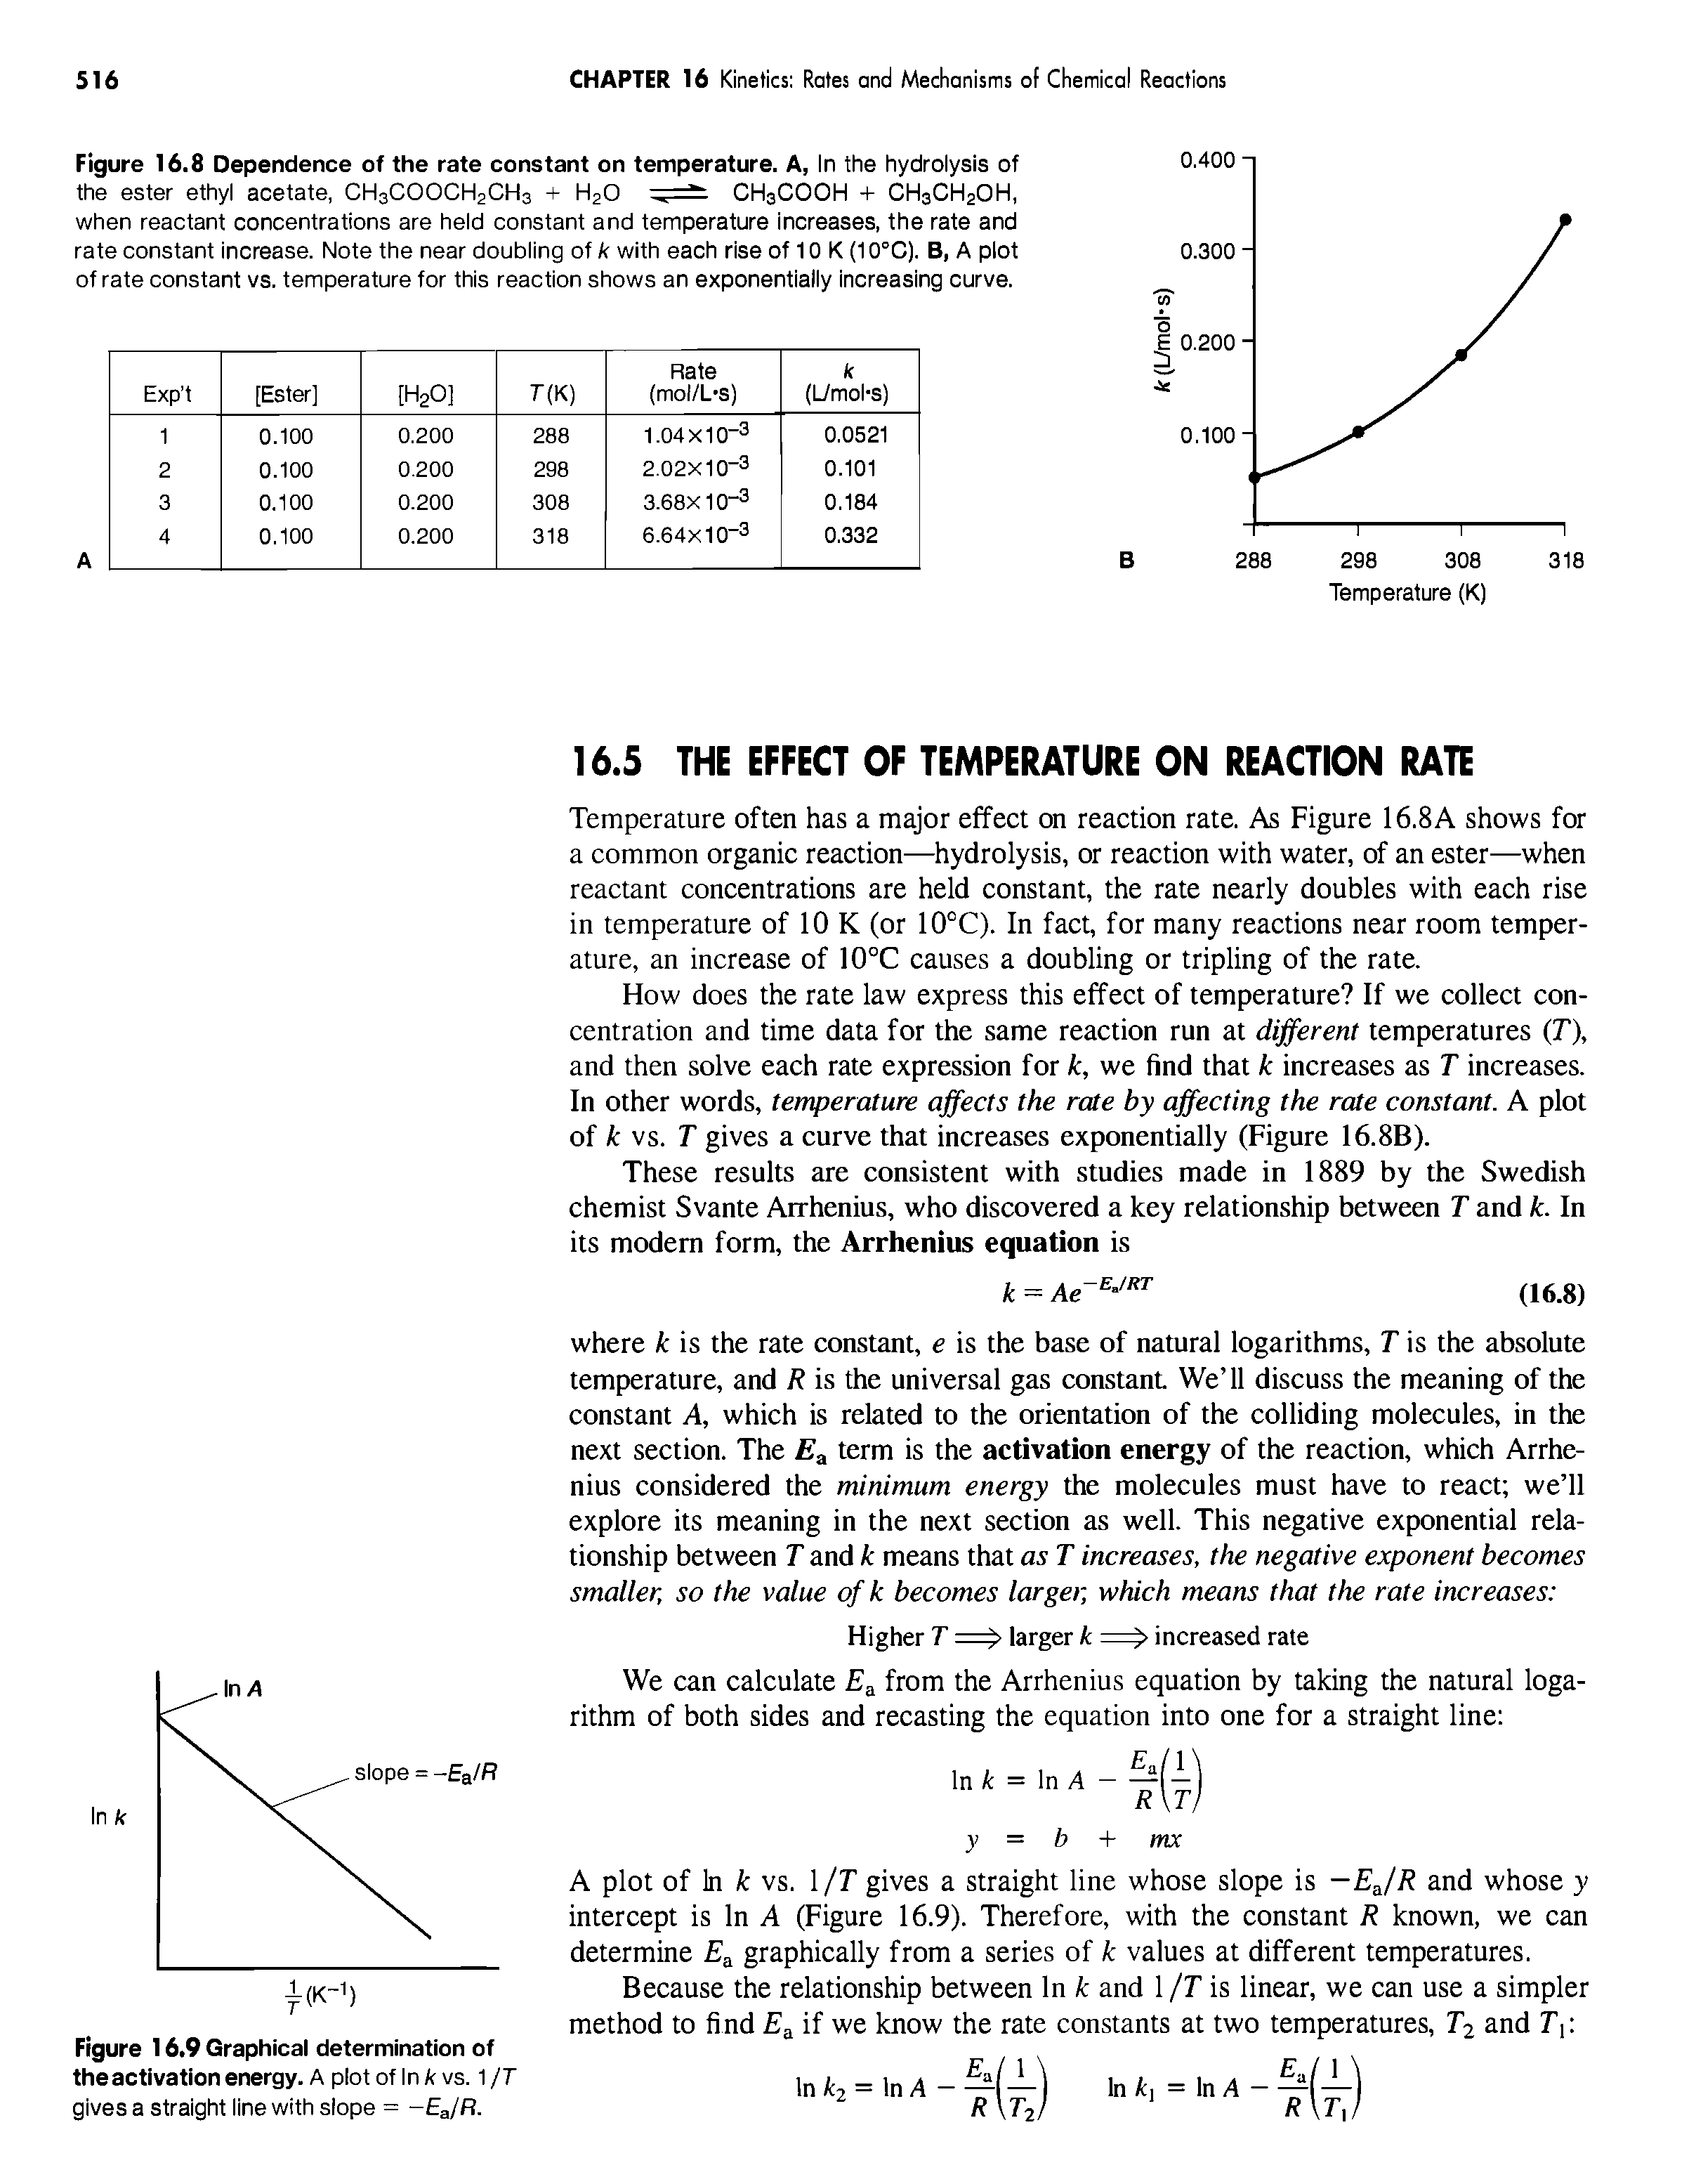 Figure 16.8 Dependence of the rate constant on temperature. A, In the hydrolysis of the ester ethyl acetate, CH3COOCH2CH3 + H2O CH3COOH + CH3CH2OH, when reactant concentrations are held constant and temperature increases, the rate and rate constant increase. Note the near doubling of k with each rise of 10 K (10°C). B, A plot of rate constant vs. temperature for this reaction shows an exponentially Increasing curve.